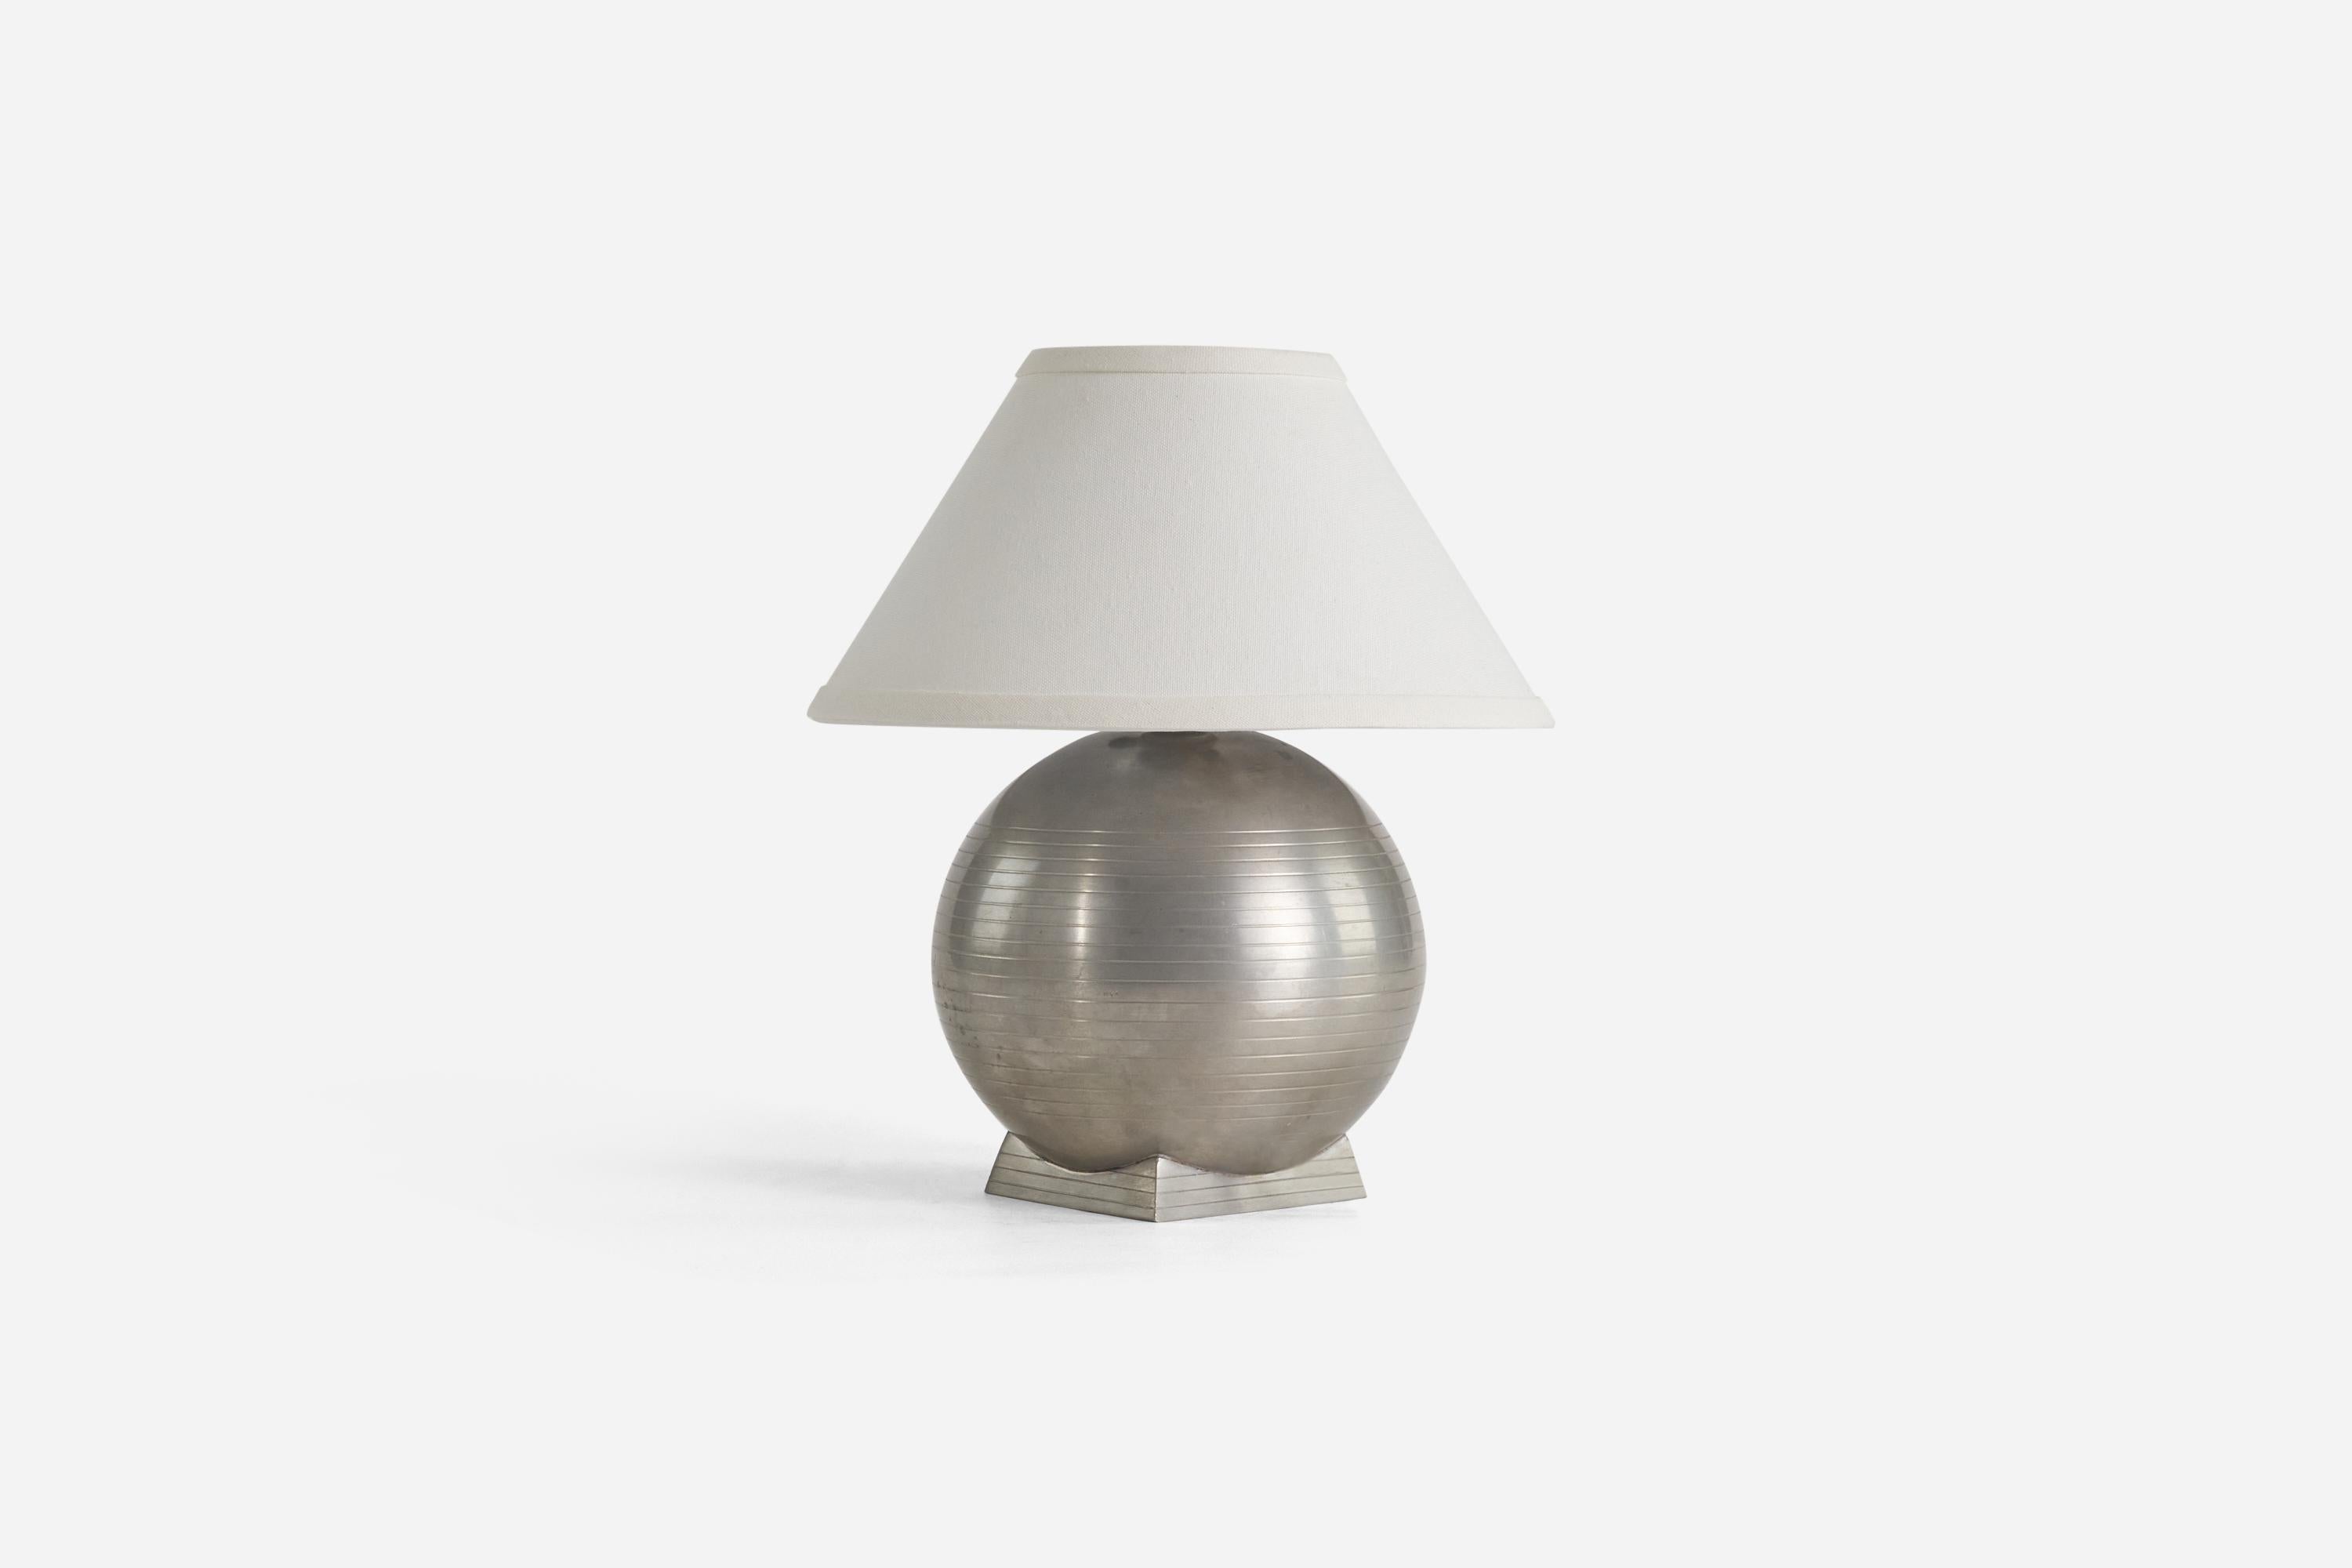 A pewter table lamp designed and produced by GAB Guldsmedsaktiebolaget, Sweden, 1930s. 

Sold without Lampshade(s)
Dimensions of Lamp (inches) : 9.81 x 7 x 7 (Height x Width x Depth)
Dimensions of Shade (inches) : 4.25 x 10.25 x 6 (Top Diameter x